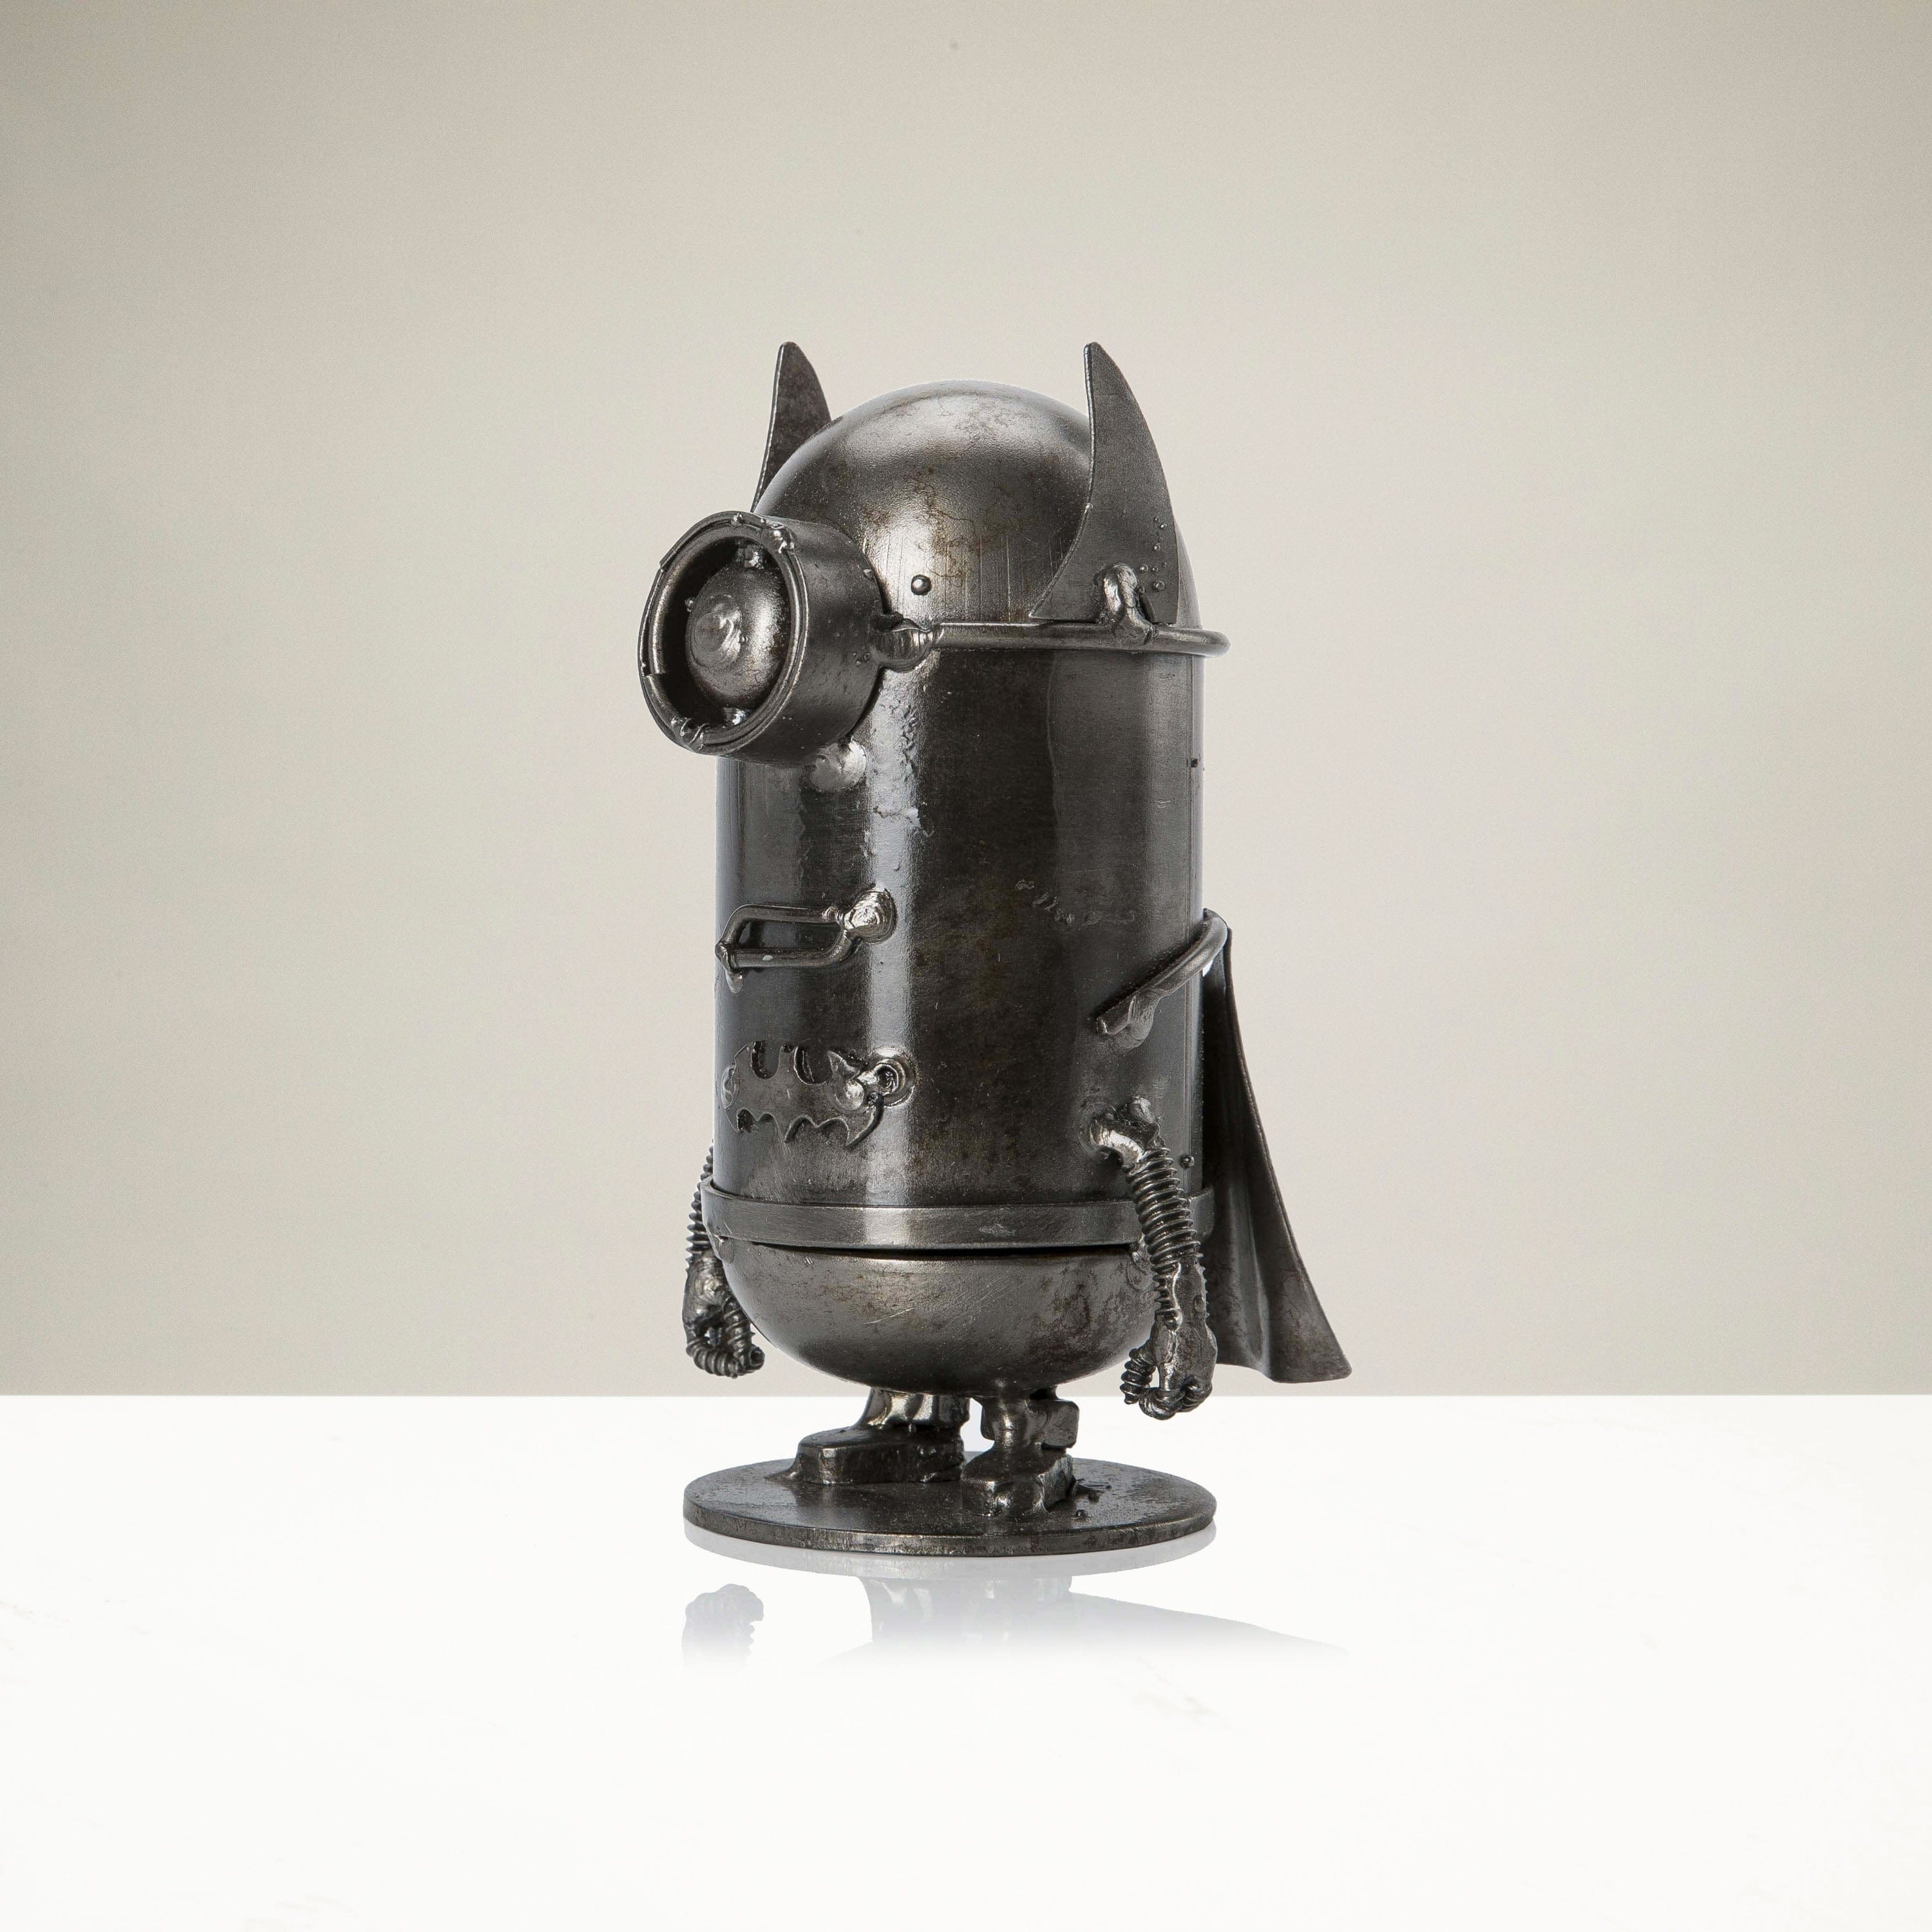 Kalifano Recycled Metal Art Minion Batman Inspired Recycled Metal Sculpture RMS-250MBM-N